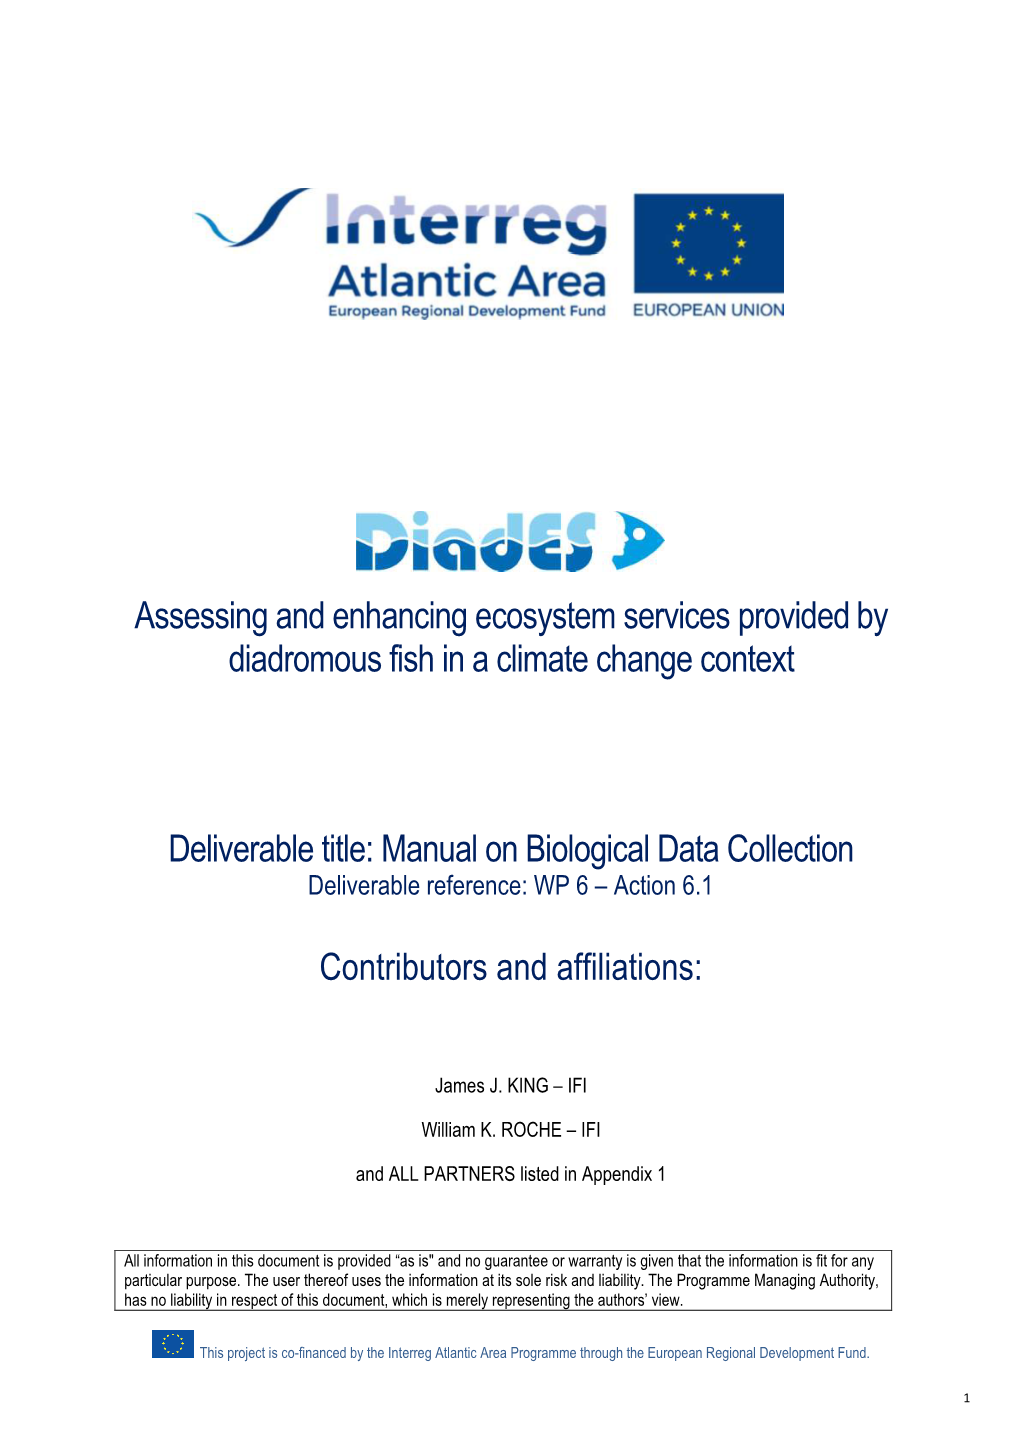 Manual on Biological Data Collection Deliverable Reference: WP 6 – Action 6.1